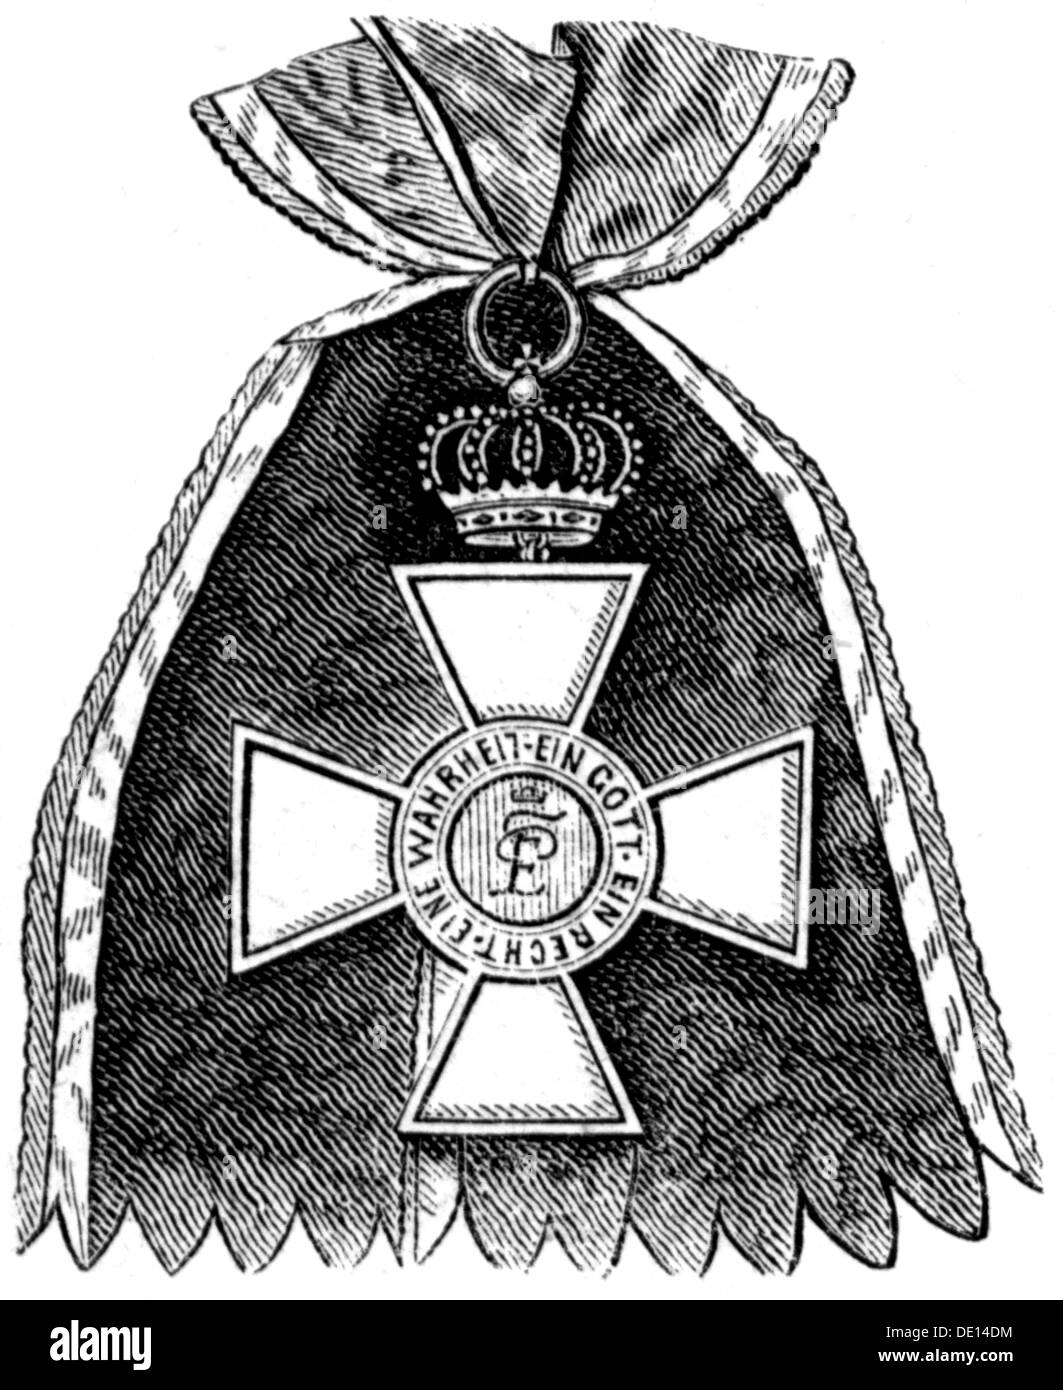 decorations, Germany, Oldenburg, House and Merit Order of Duke Peter Frederick Louis, founded 27.11.1838 by Grand Duke August of Oldenburg, badge, wood engraving, 2nd half 19th century, cross, crosses, ribbon, ribbons, Grand Duchy of Oldenburg, Duke, medal, decoration, medals, decorations, historic, historical, Additional-Rights-Clearences-Not Available Stock Photo